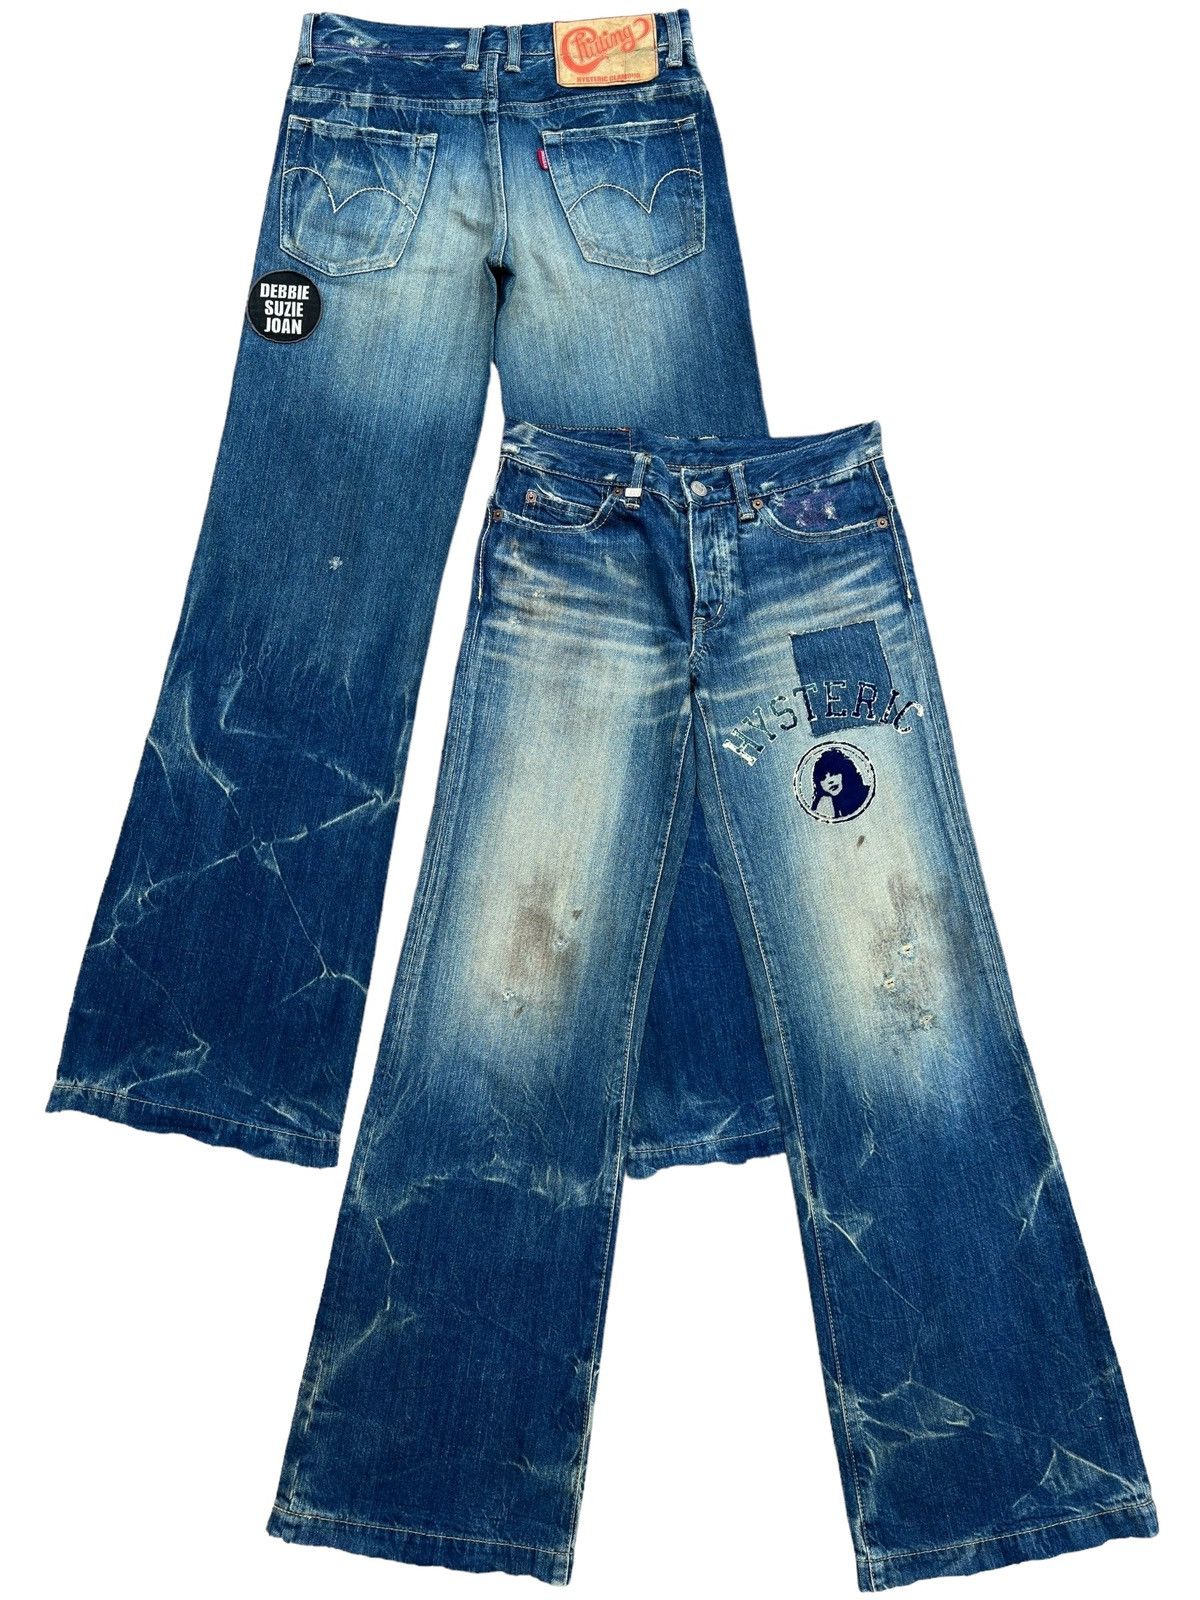 Hysteric Glamour Distressed Lowrise Flare Denim Jeans 29x32 - 1